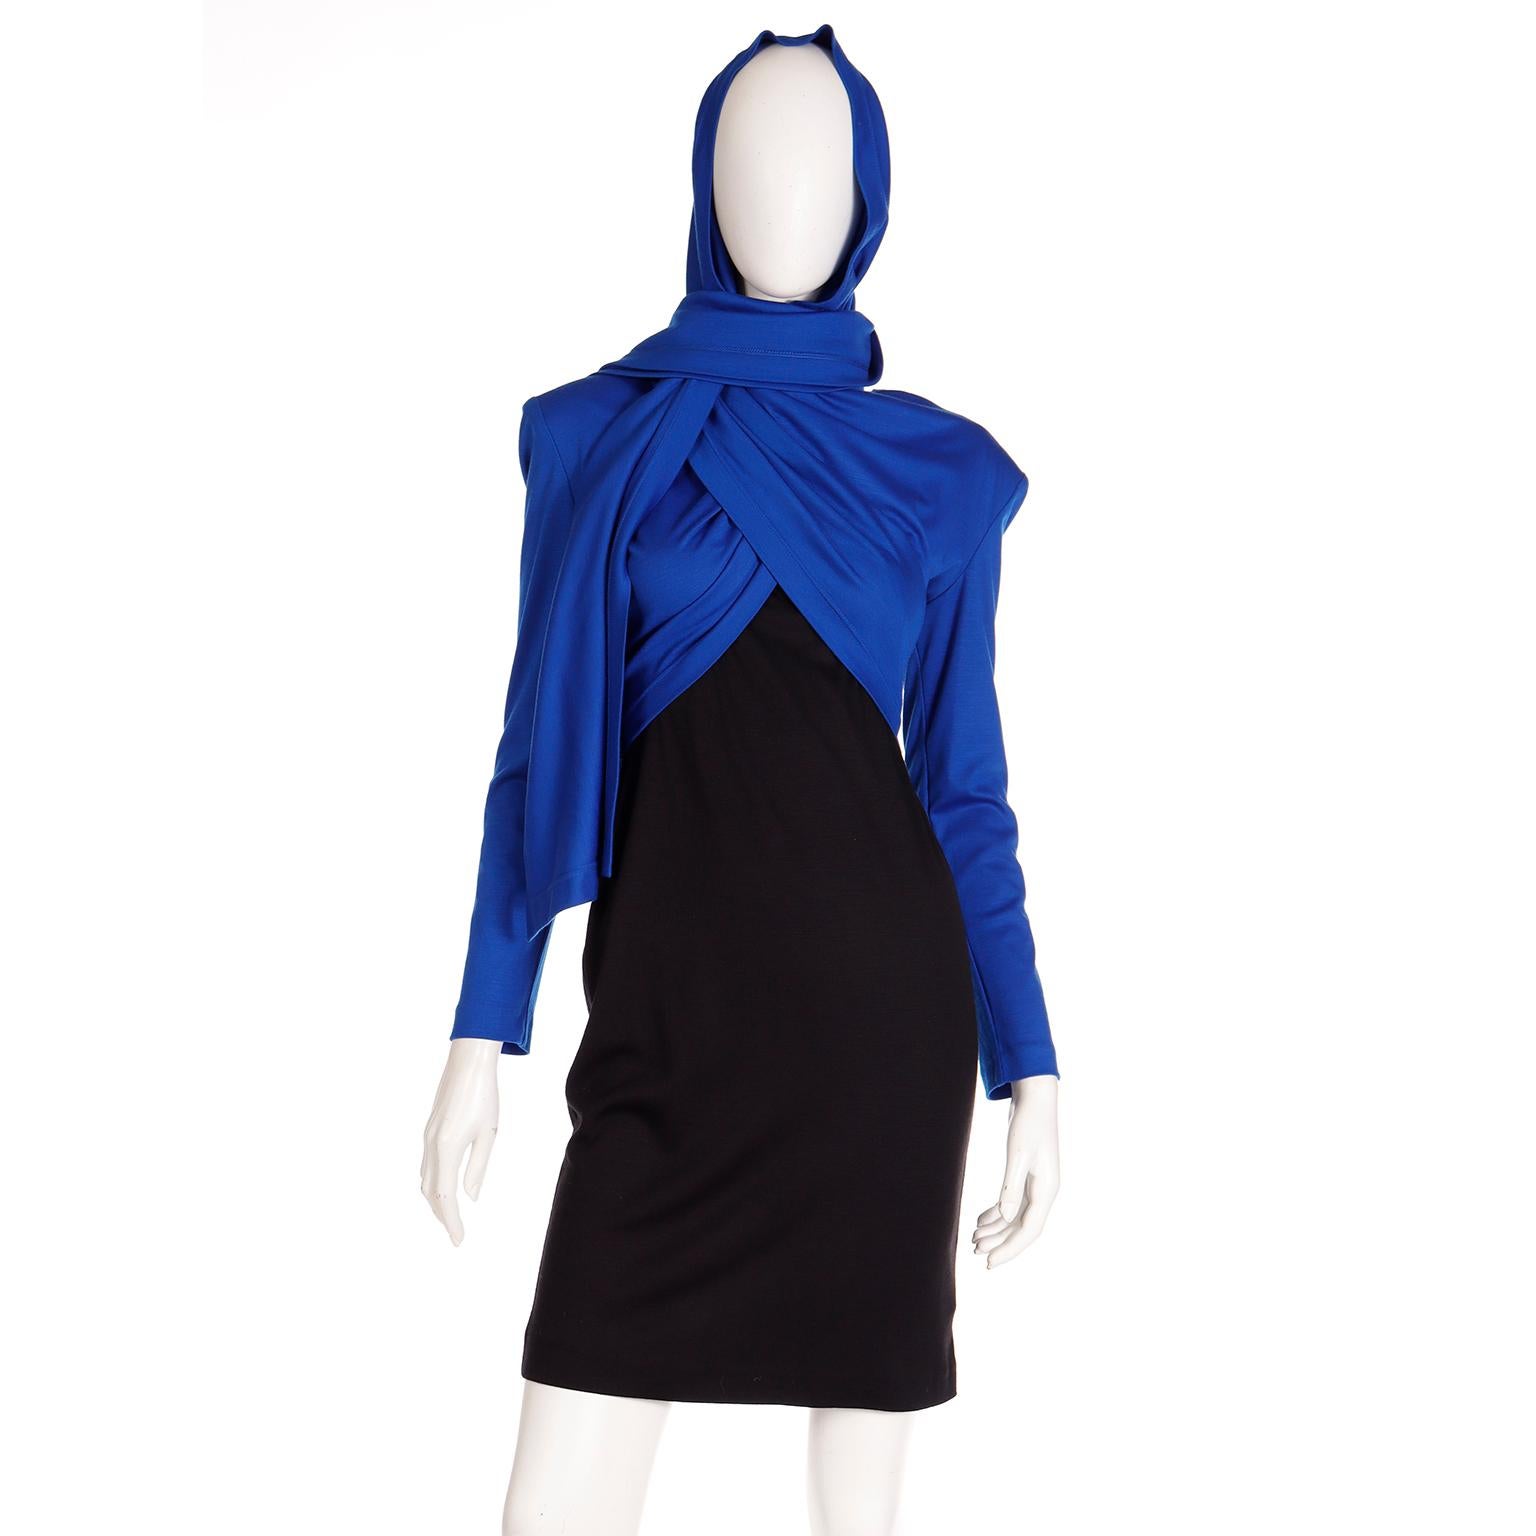 FW 1989 Patrick Kelly Runway Dress in Blue & Black Knit with Head Scarf  For Sale 5